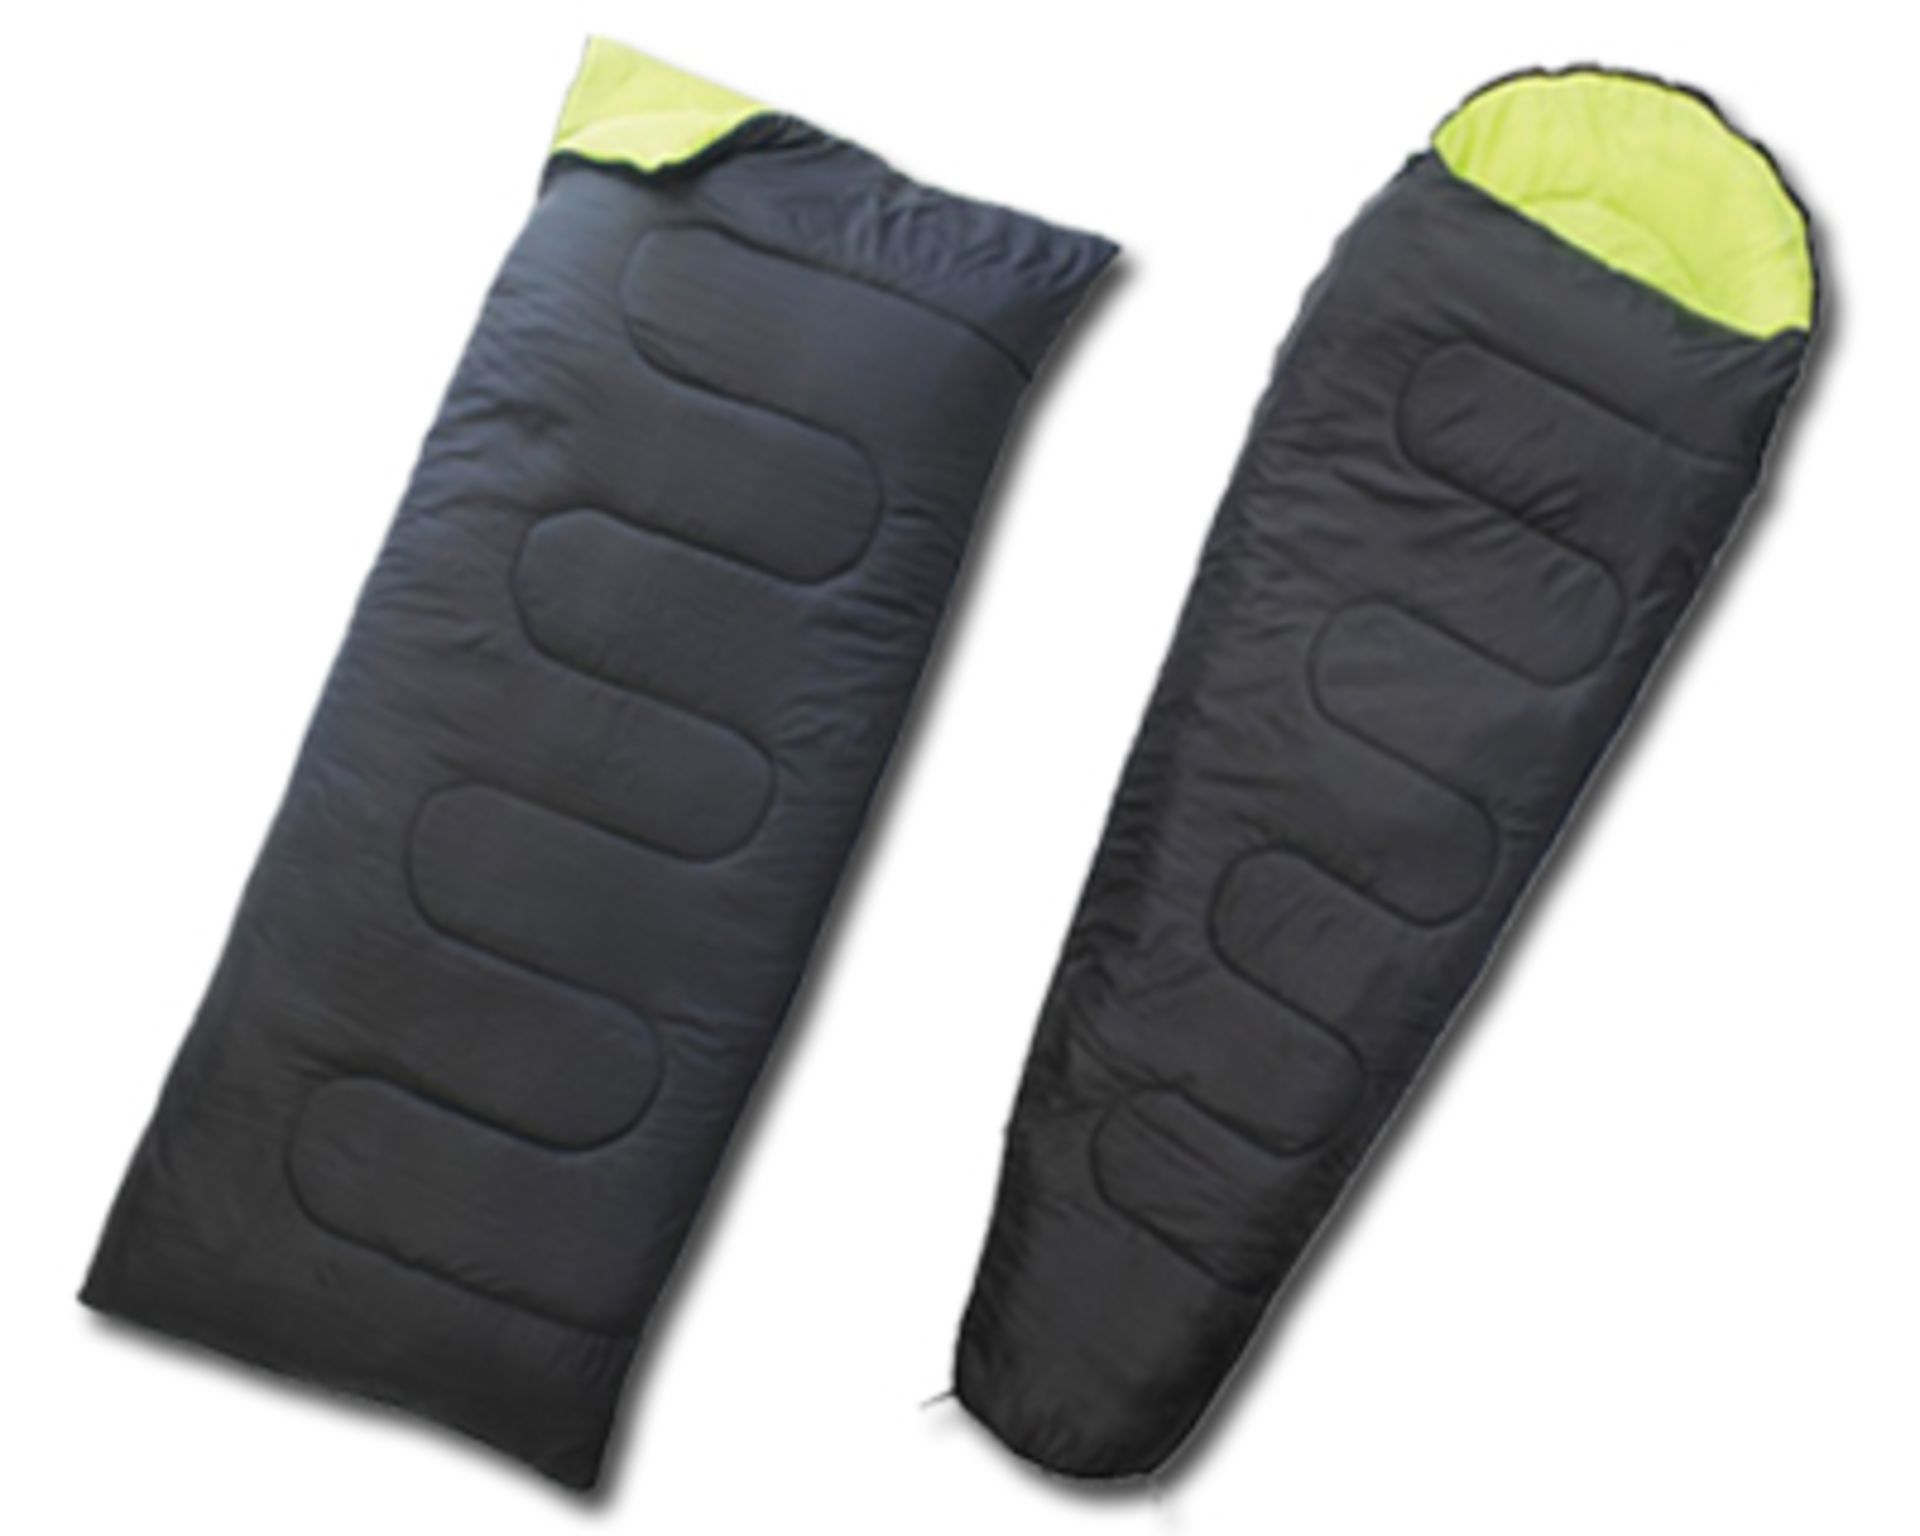 V Brand New Mummy Sleeping Bag X 2 Bid price to be multiplied by Two